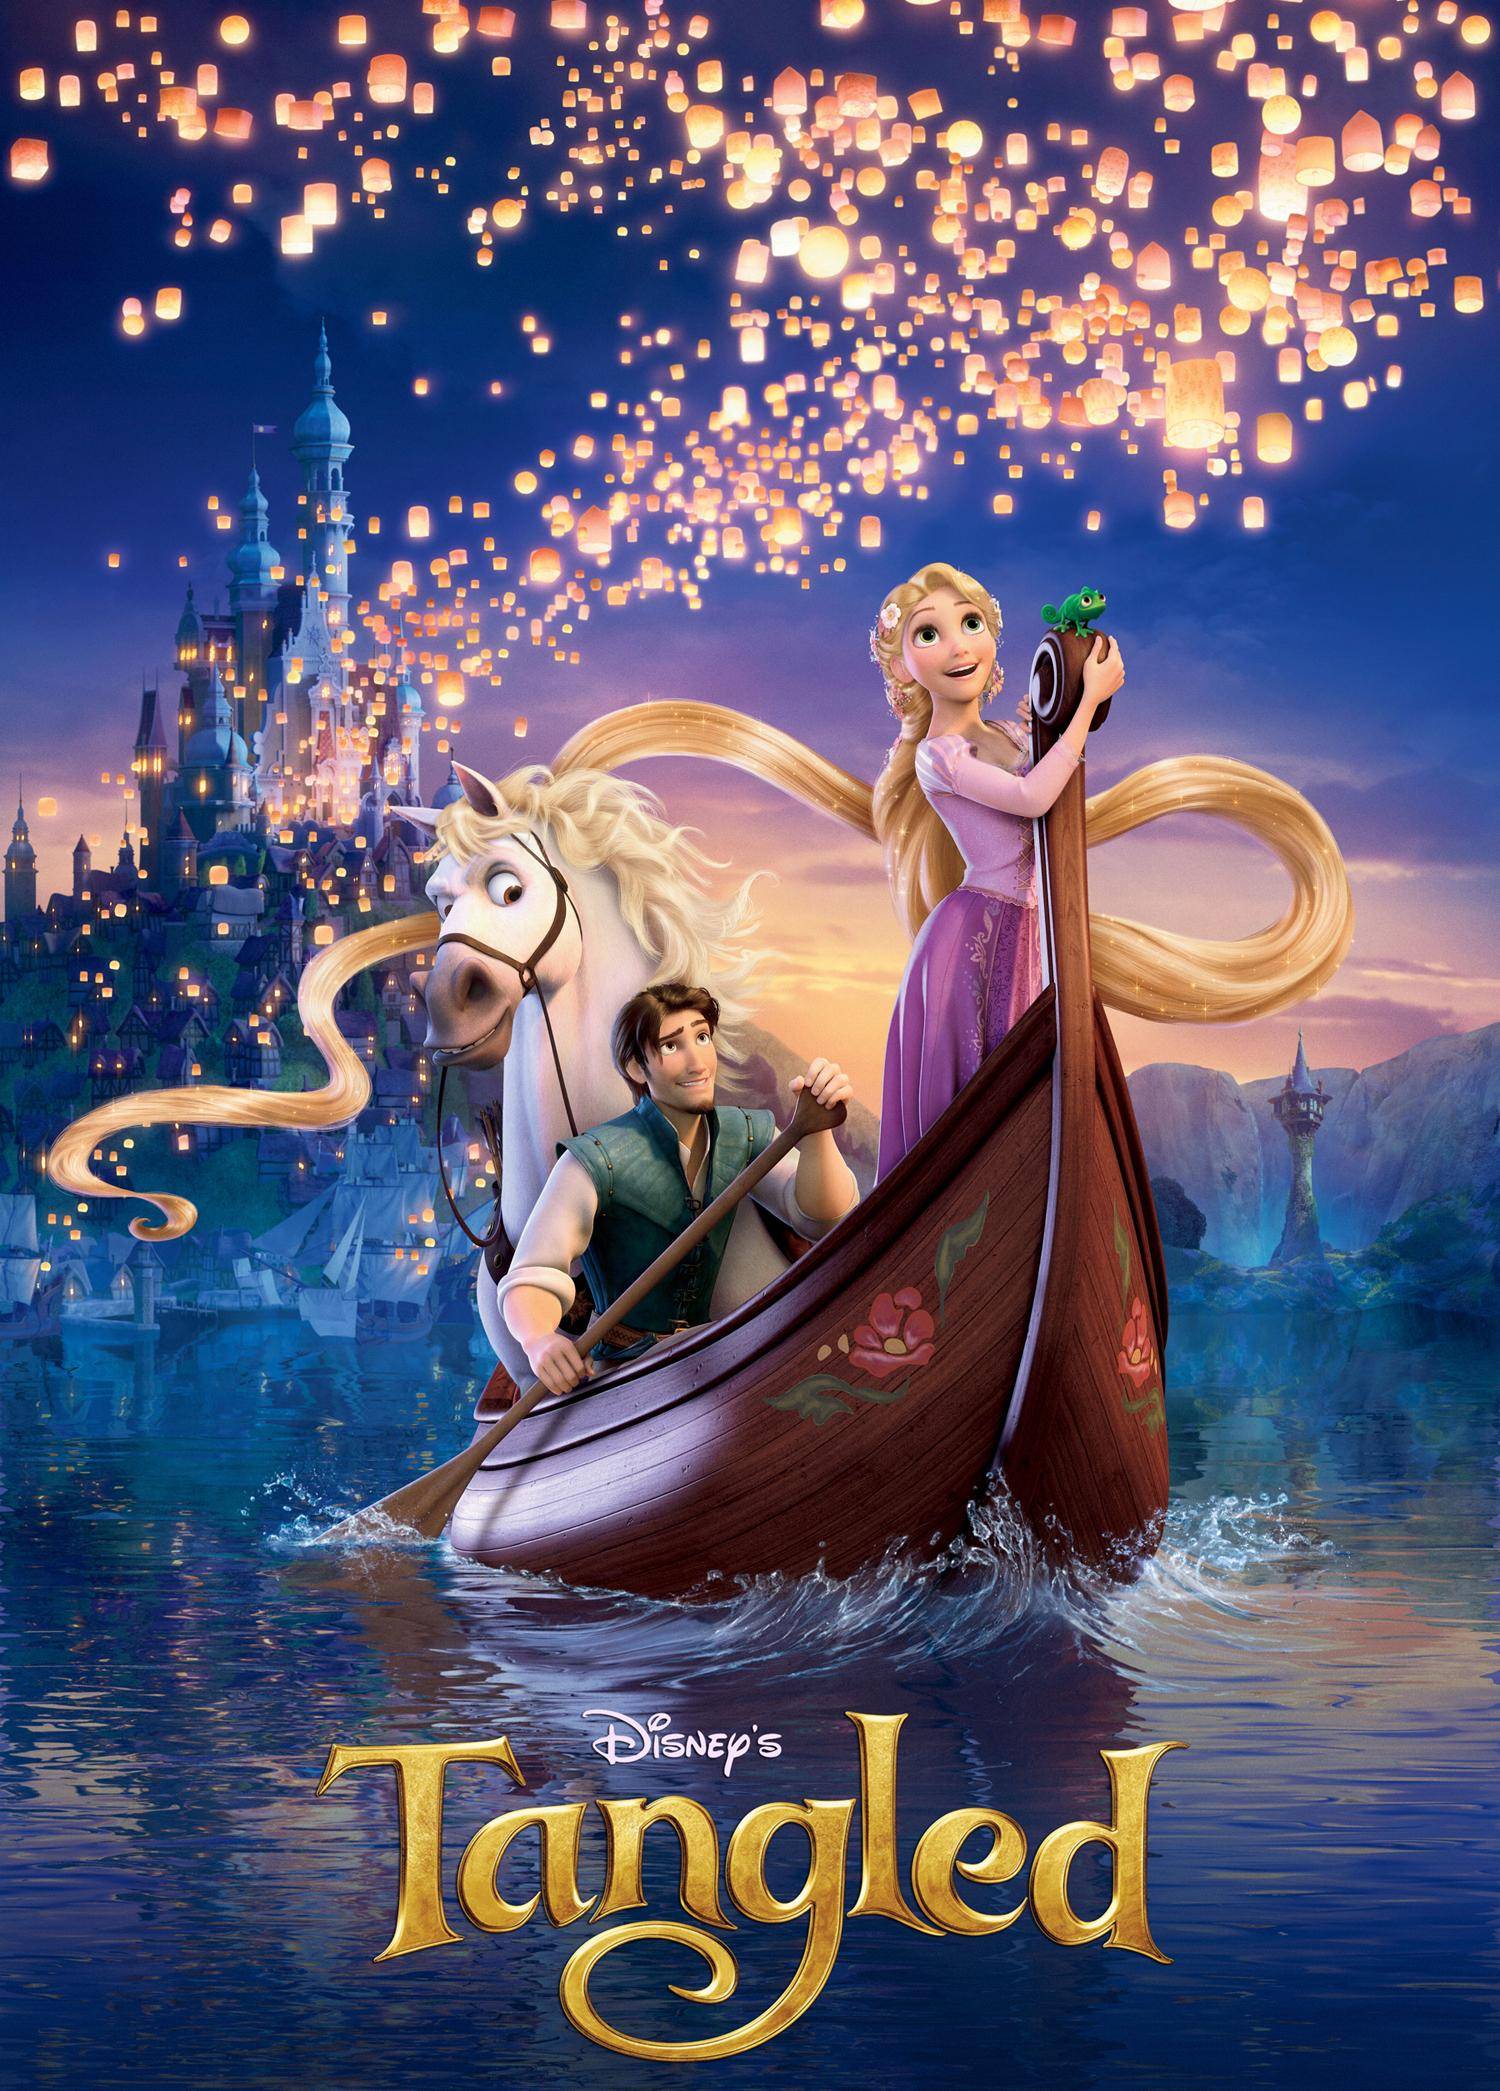 Tangled HD Wallpaper for Free